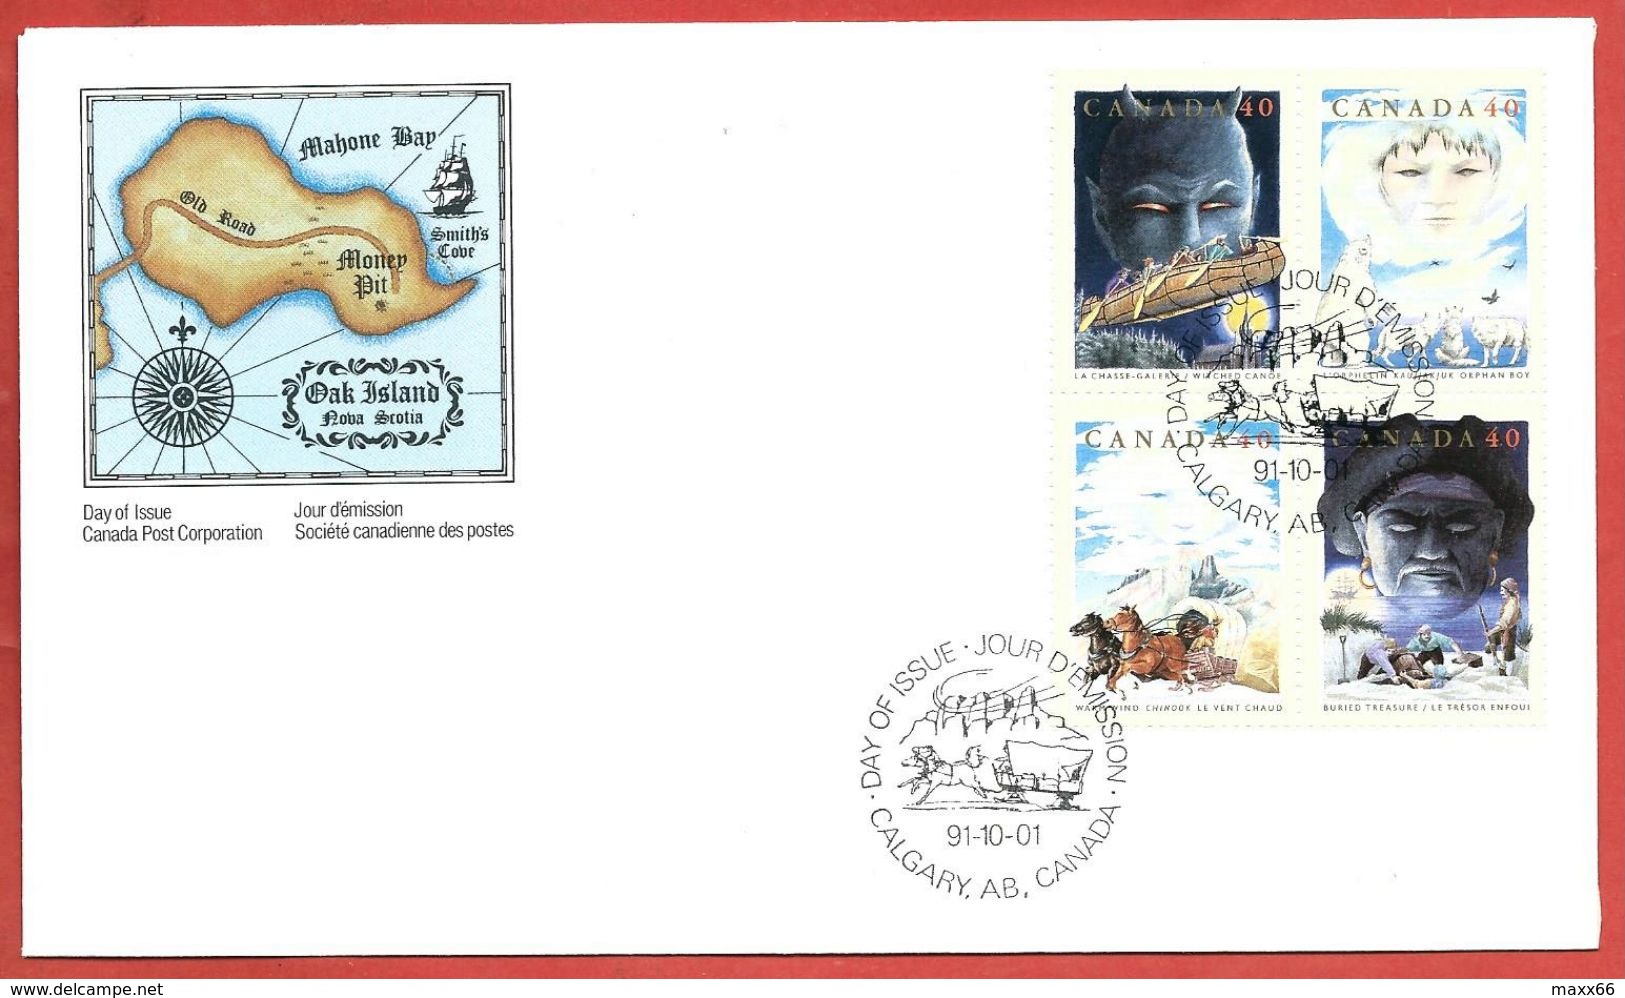 CANADA PRESENTATION PACK FDC - 1991 FOLKTALES - Contes Populaires - With FDC - FOLDER - Gedenkausgaben